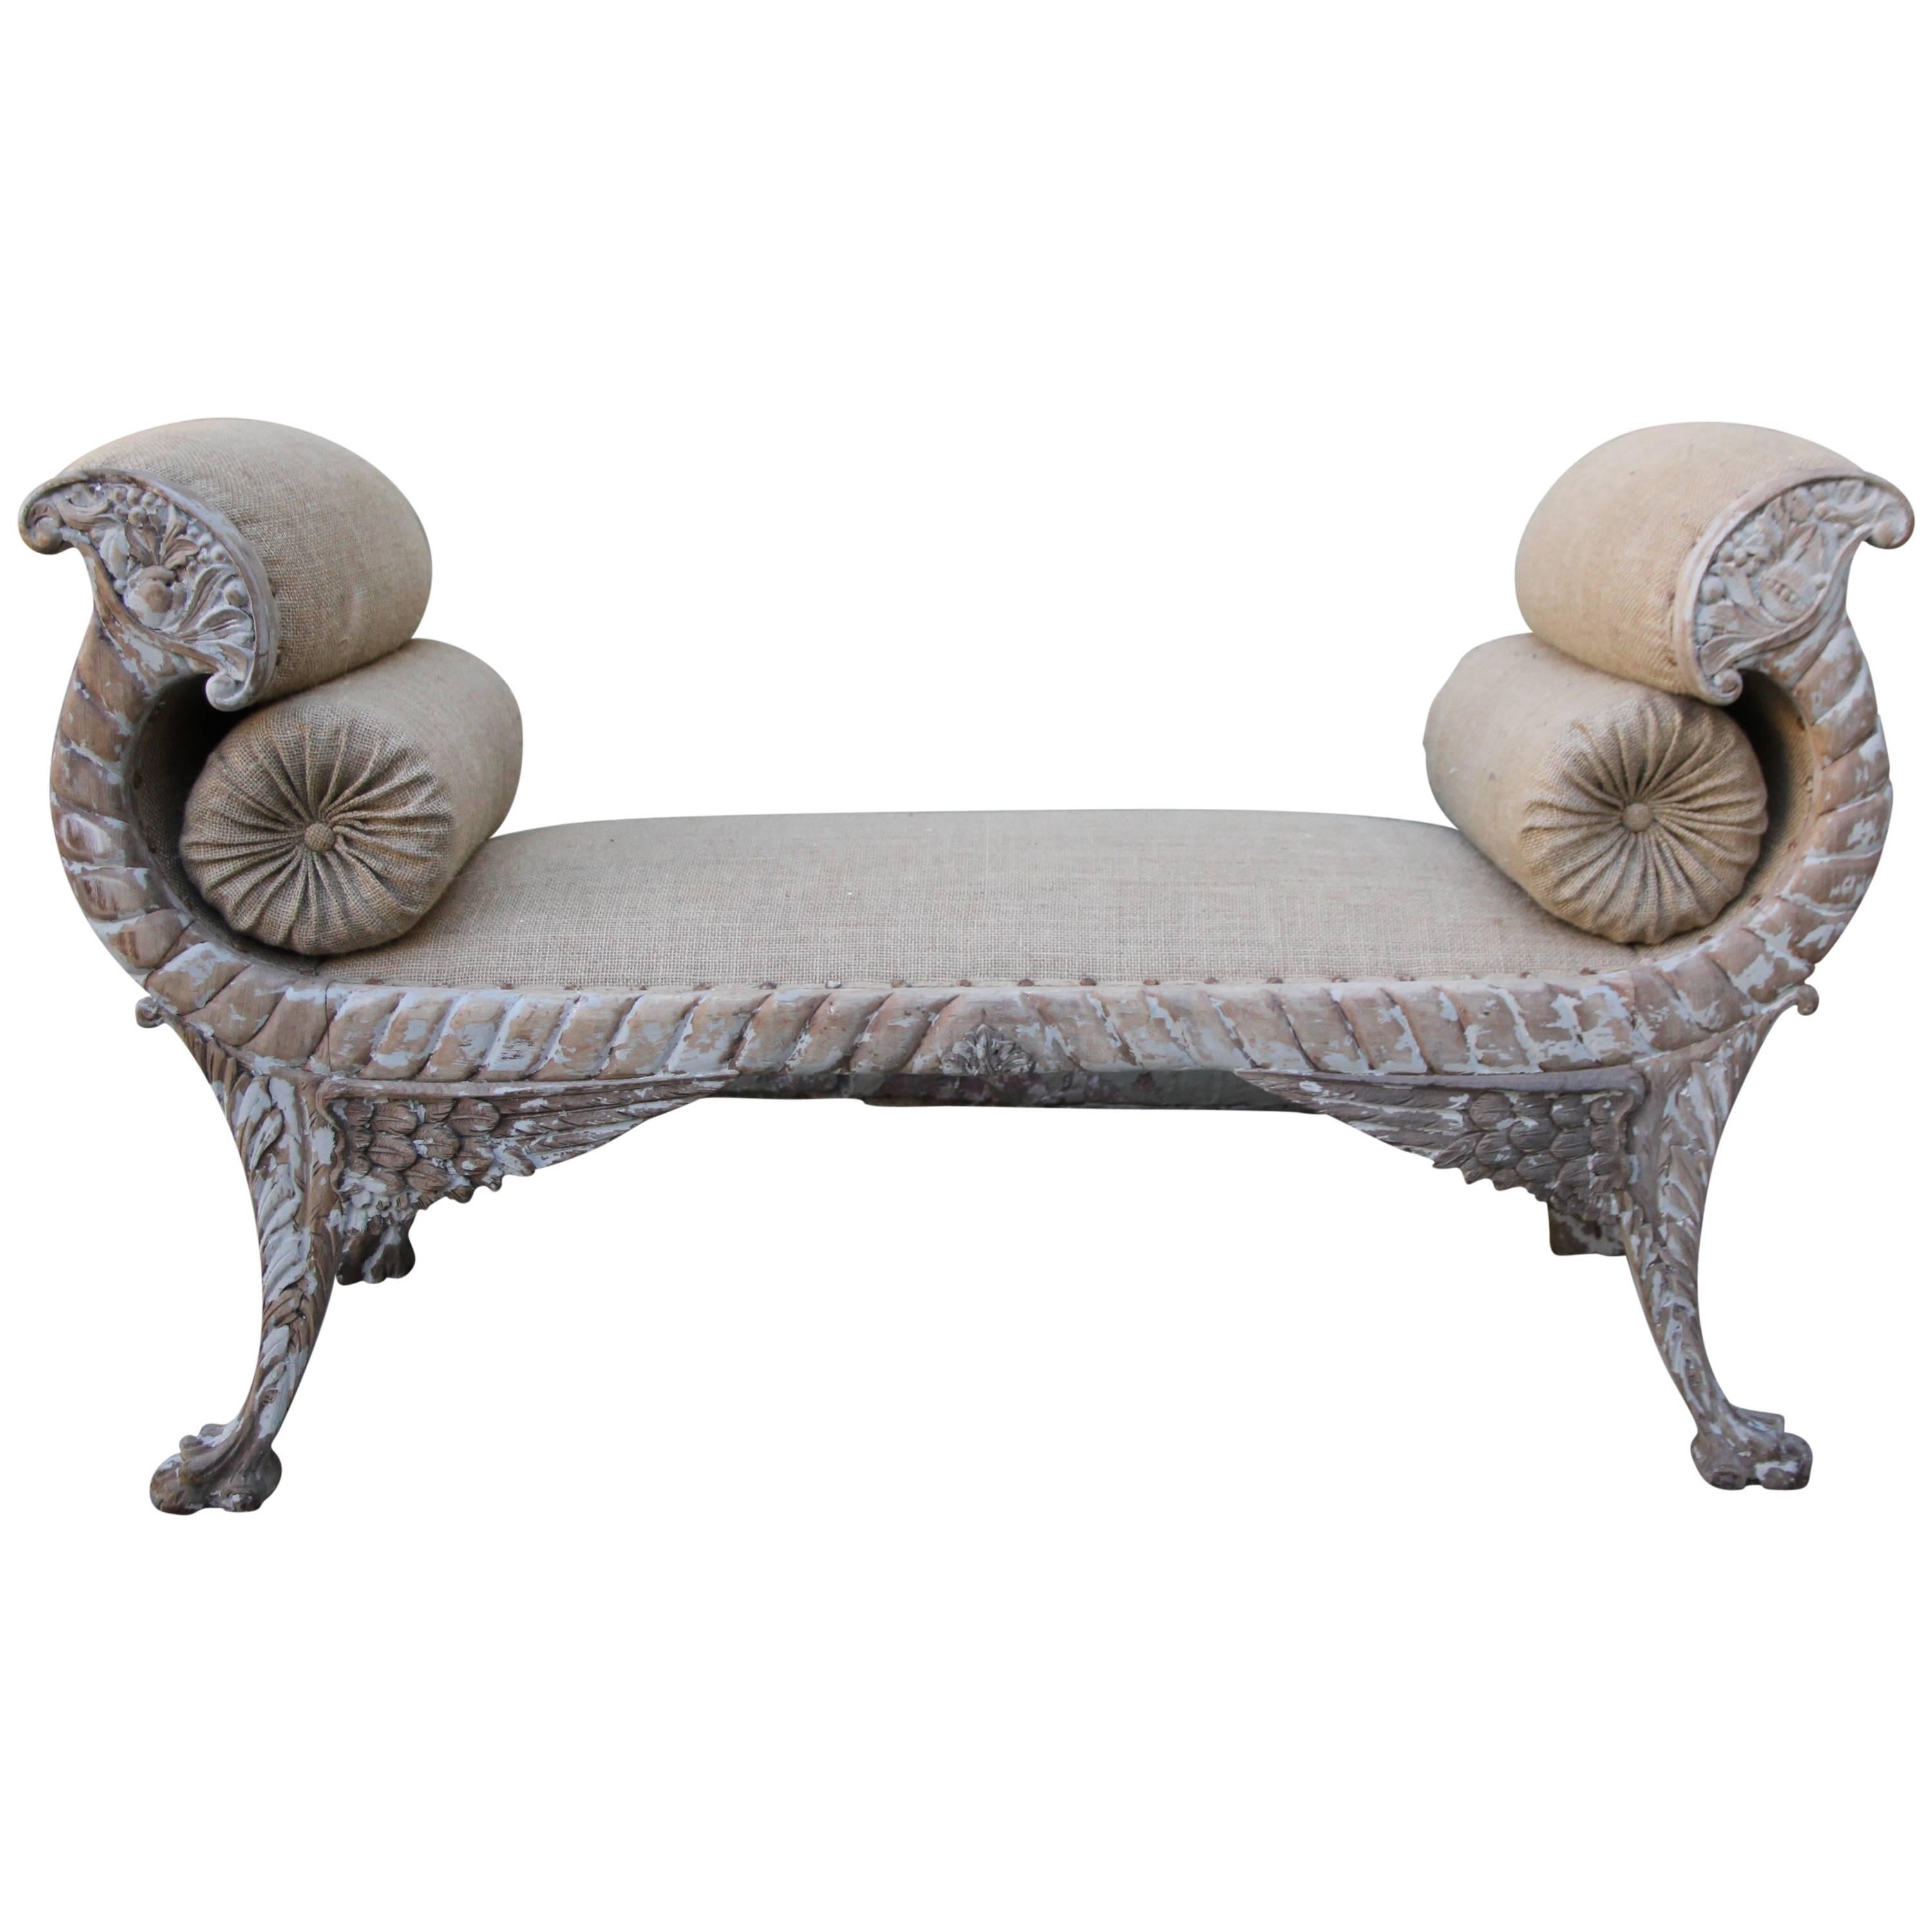 Regency Style Carved Wood Bench w/ Bolsters